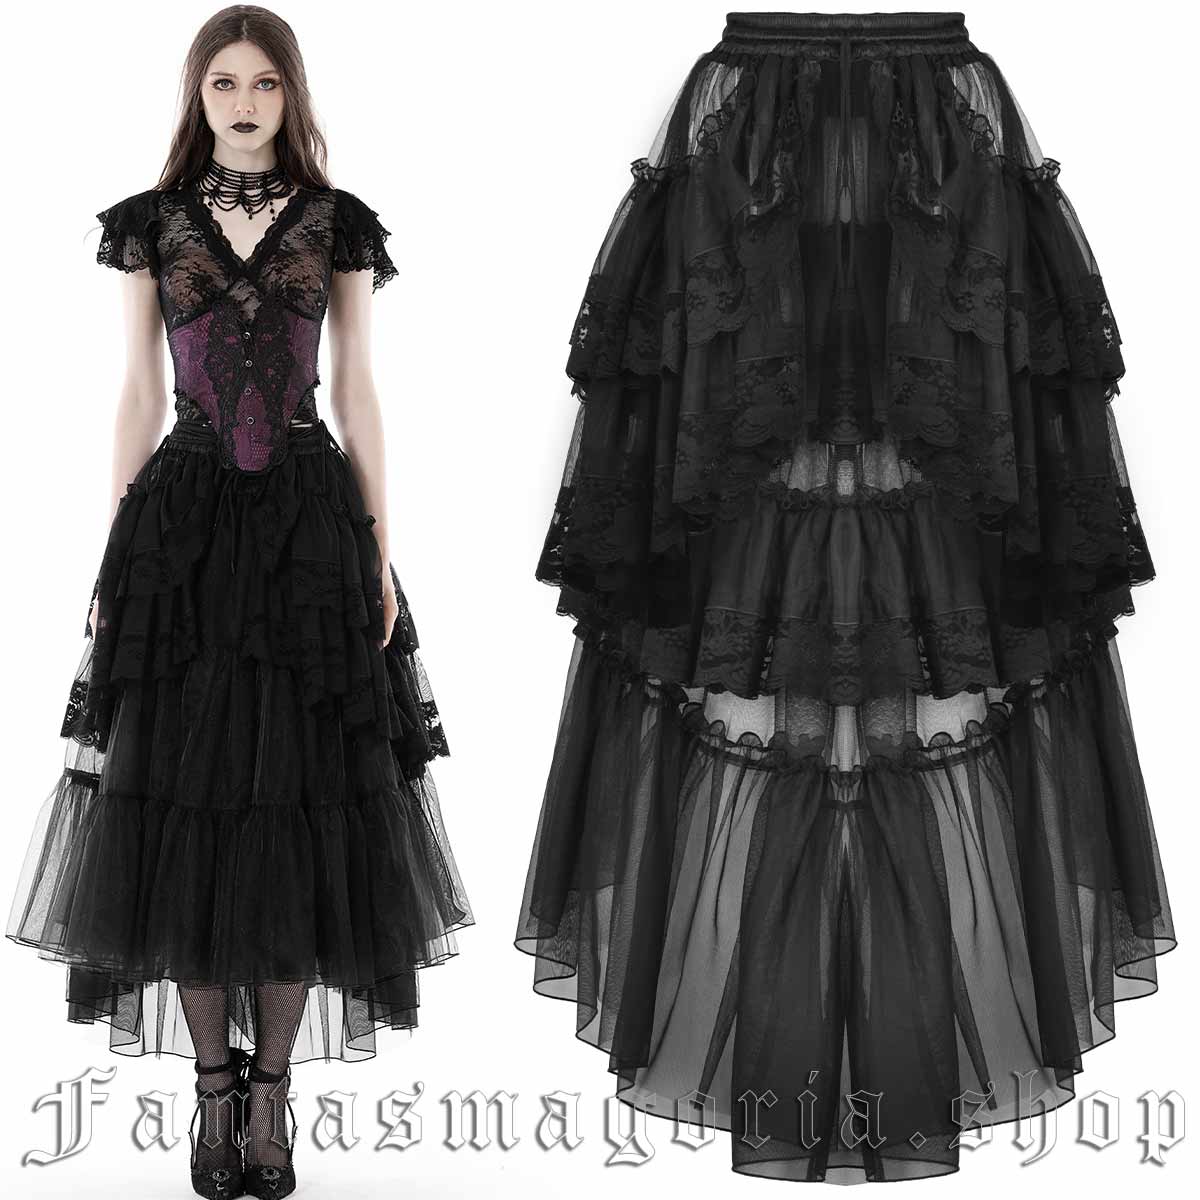 Women's Gothic black tulle and lace high-low hem ruffle skirt. - Dark in Love - KW293